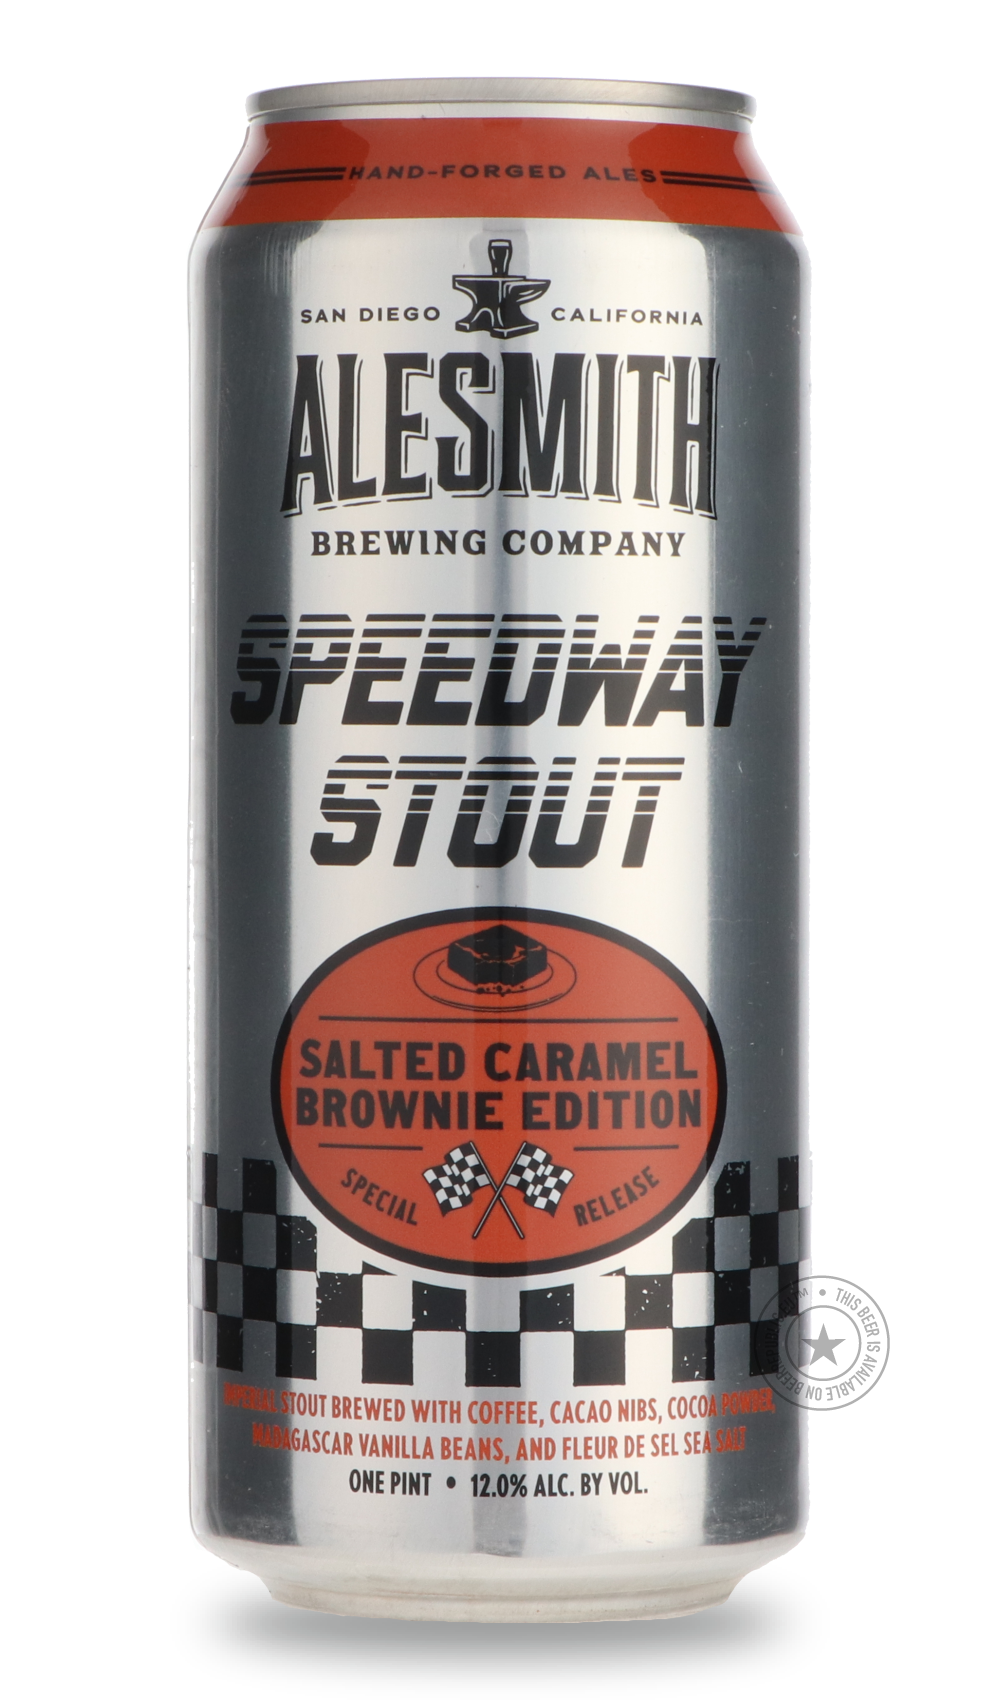 -AleSmith- Speedway Stout: Salted Caramel Brownie Edition-Stout & Porter- Only @ Beer Republic - The best online beer store for American & Canadian craft beer - Buy beer online from the USA and Canada - Bier online kopen - Amerikaans bier kopen - Craft beer store - Craft beer kopen - Amerikanisch bier kaufen - Bier online kaufen - Acheter biere online - IPA - Stout - Porter - New England IPA - Hazy IPA - Imperial Stout - Barrel Aged - Barrel Aged Imperial Stout - Brown - Dark beer - Blond - Blonde - Pilsner